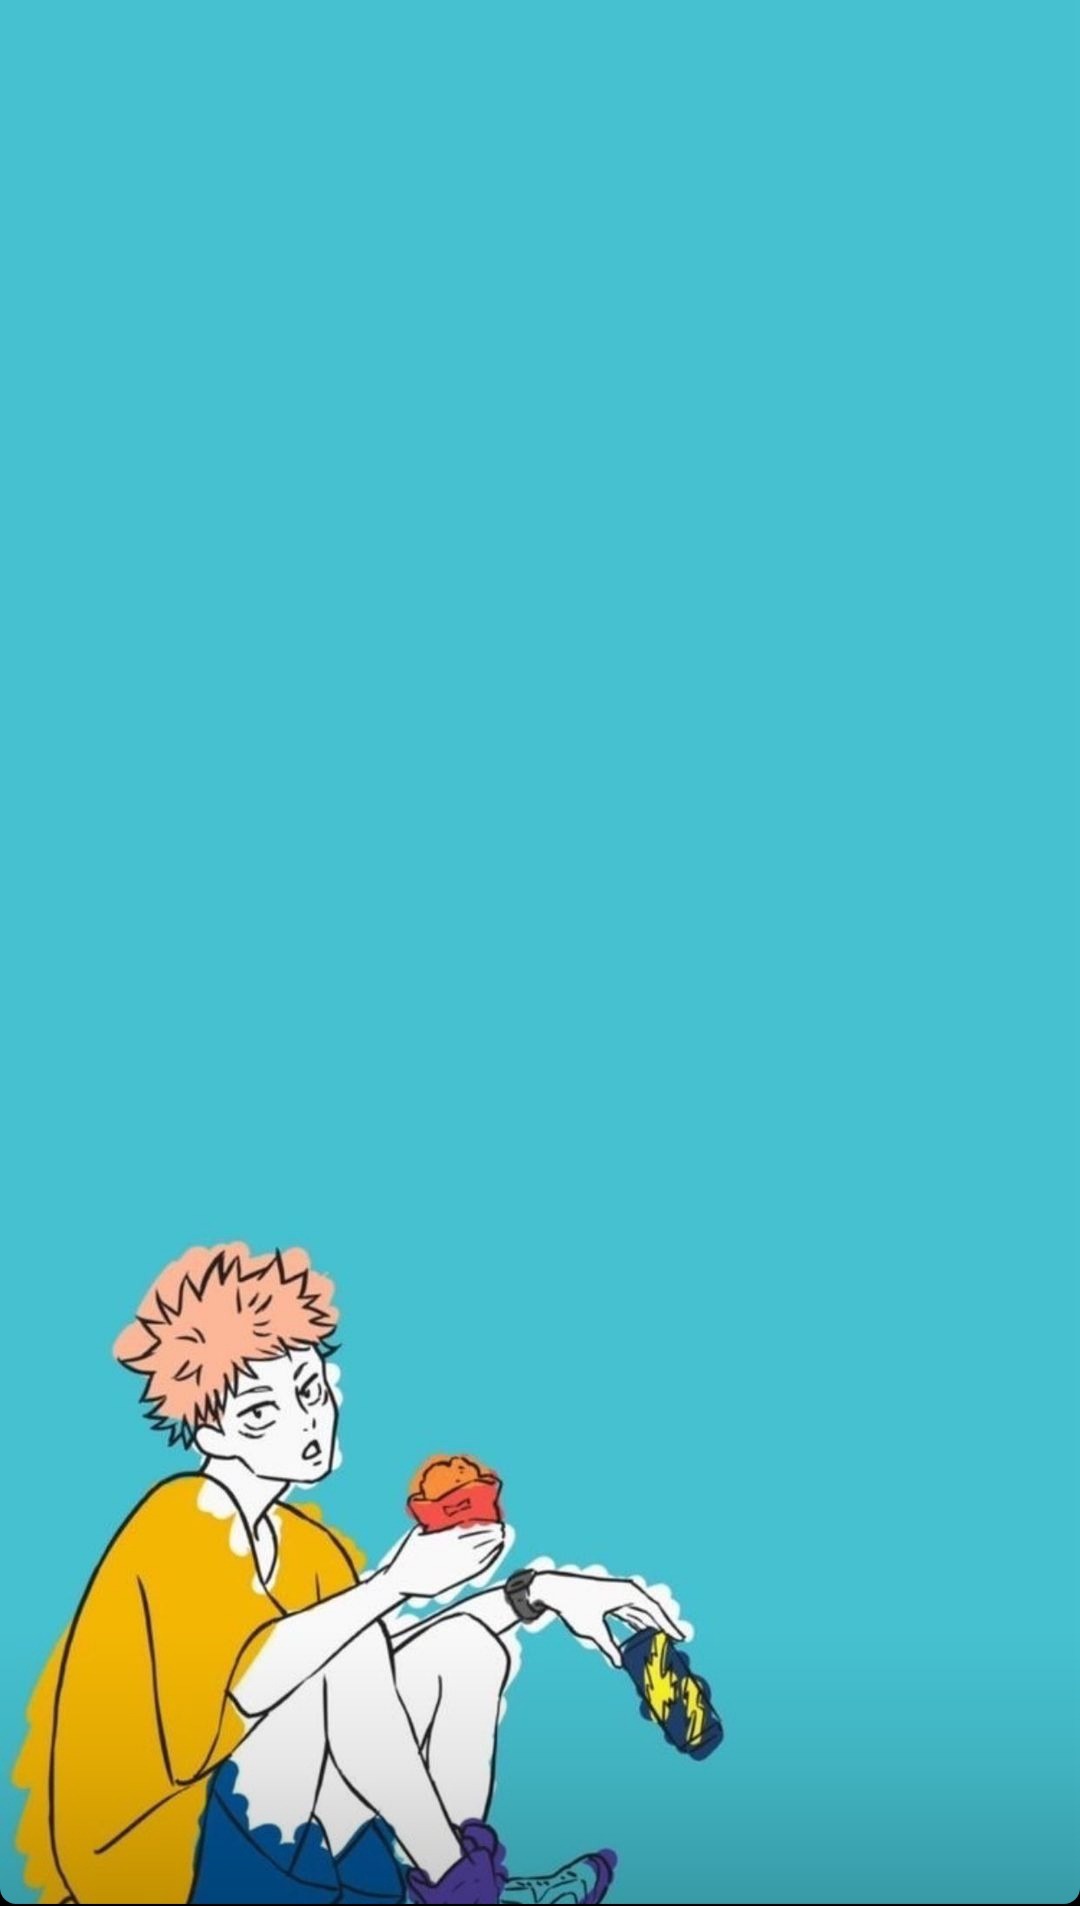 Aesthetic Anime Phone Wallpapers